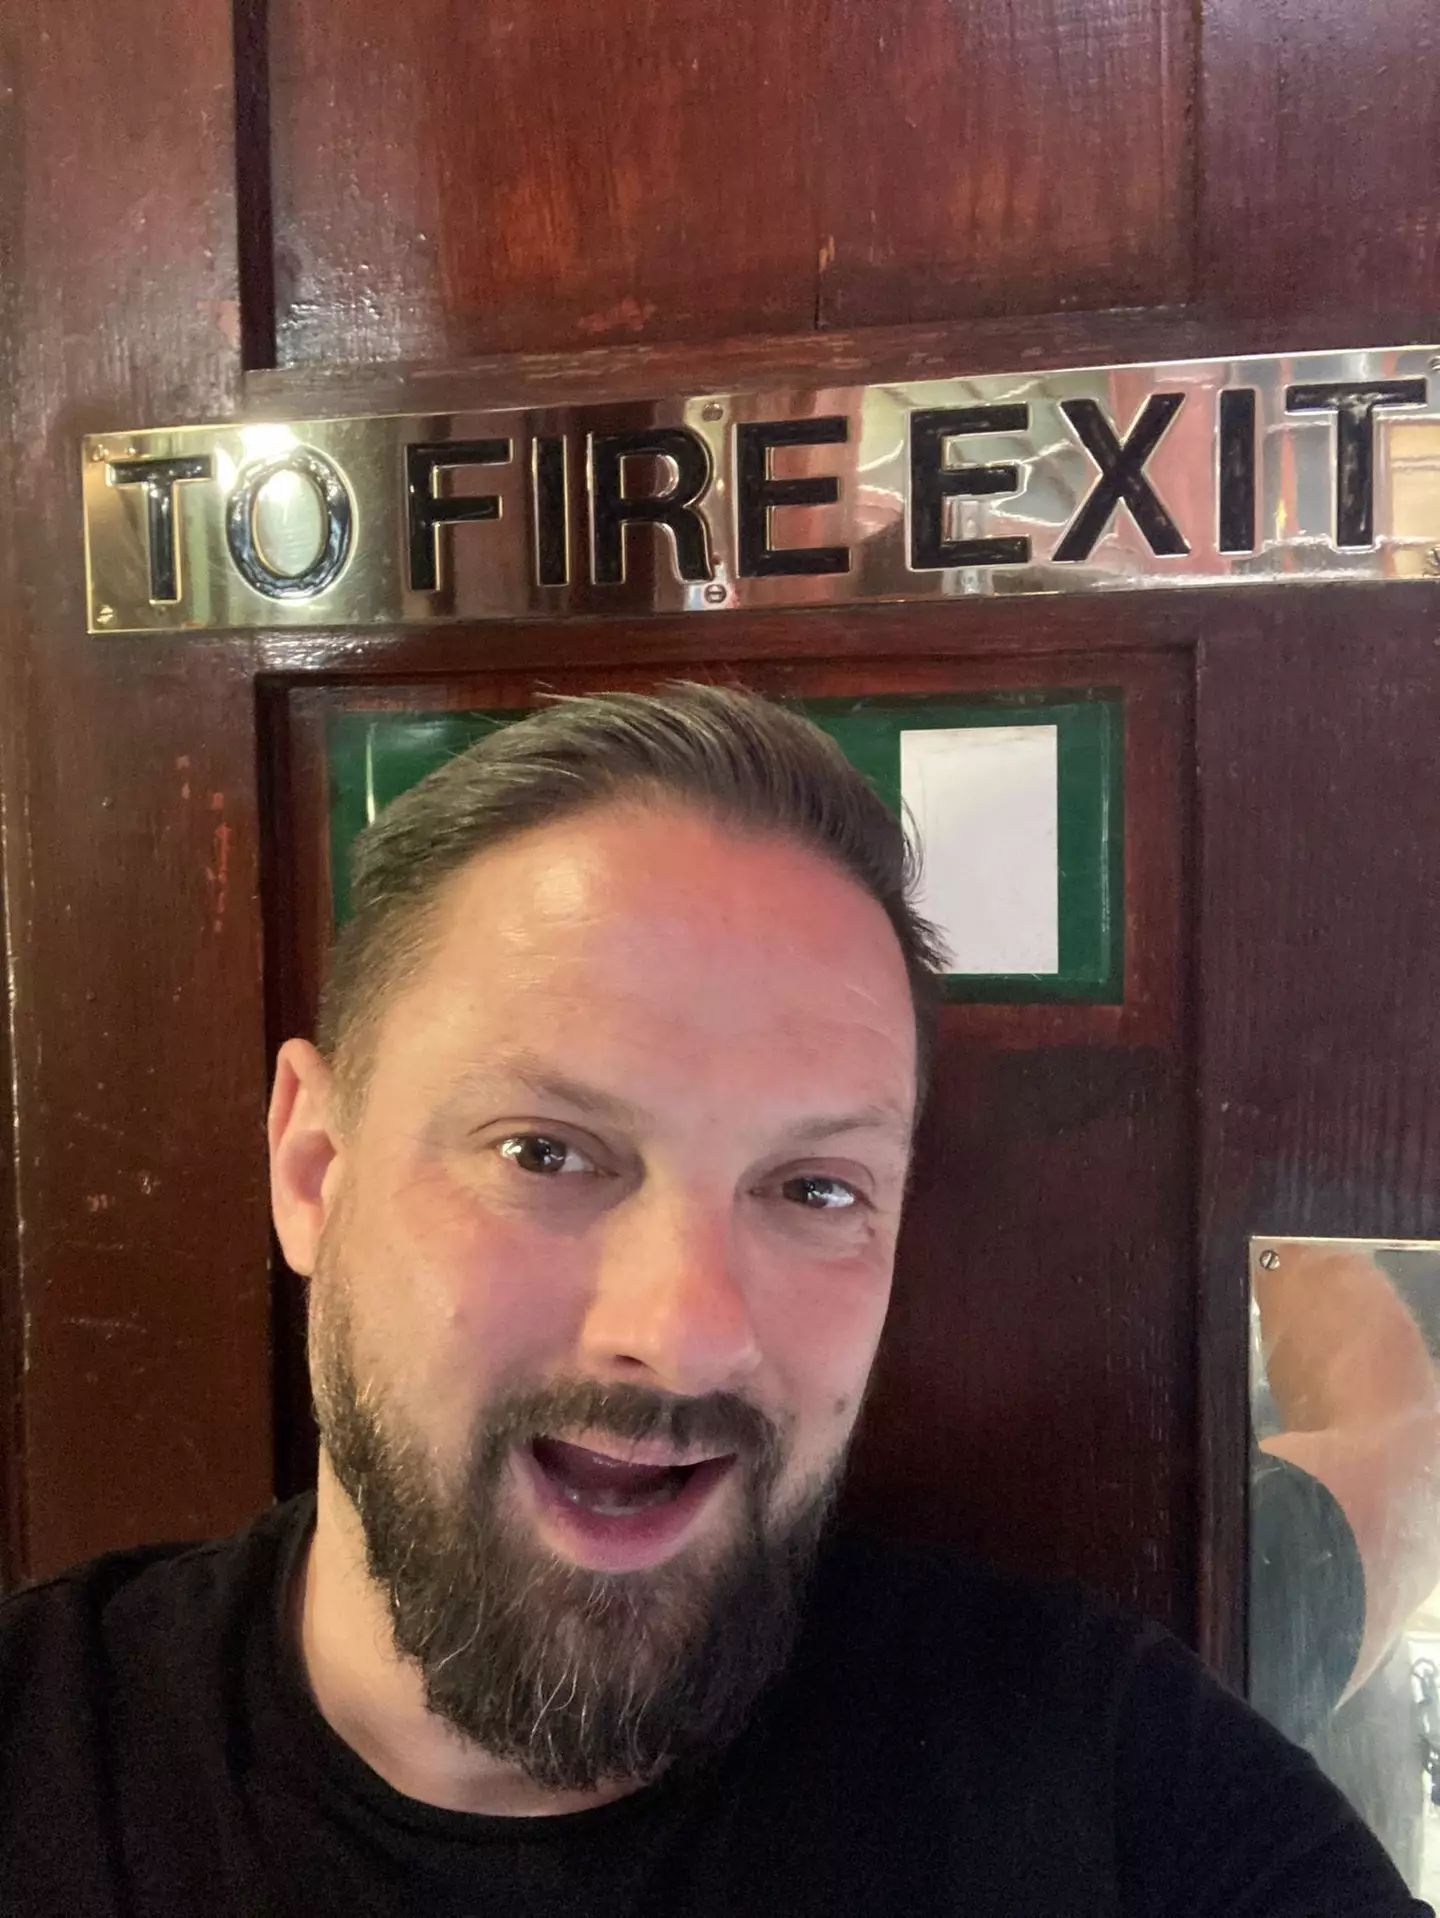 Presumably he's going to be posing next to fire exit signs for the rest of his days.